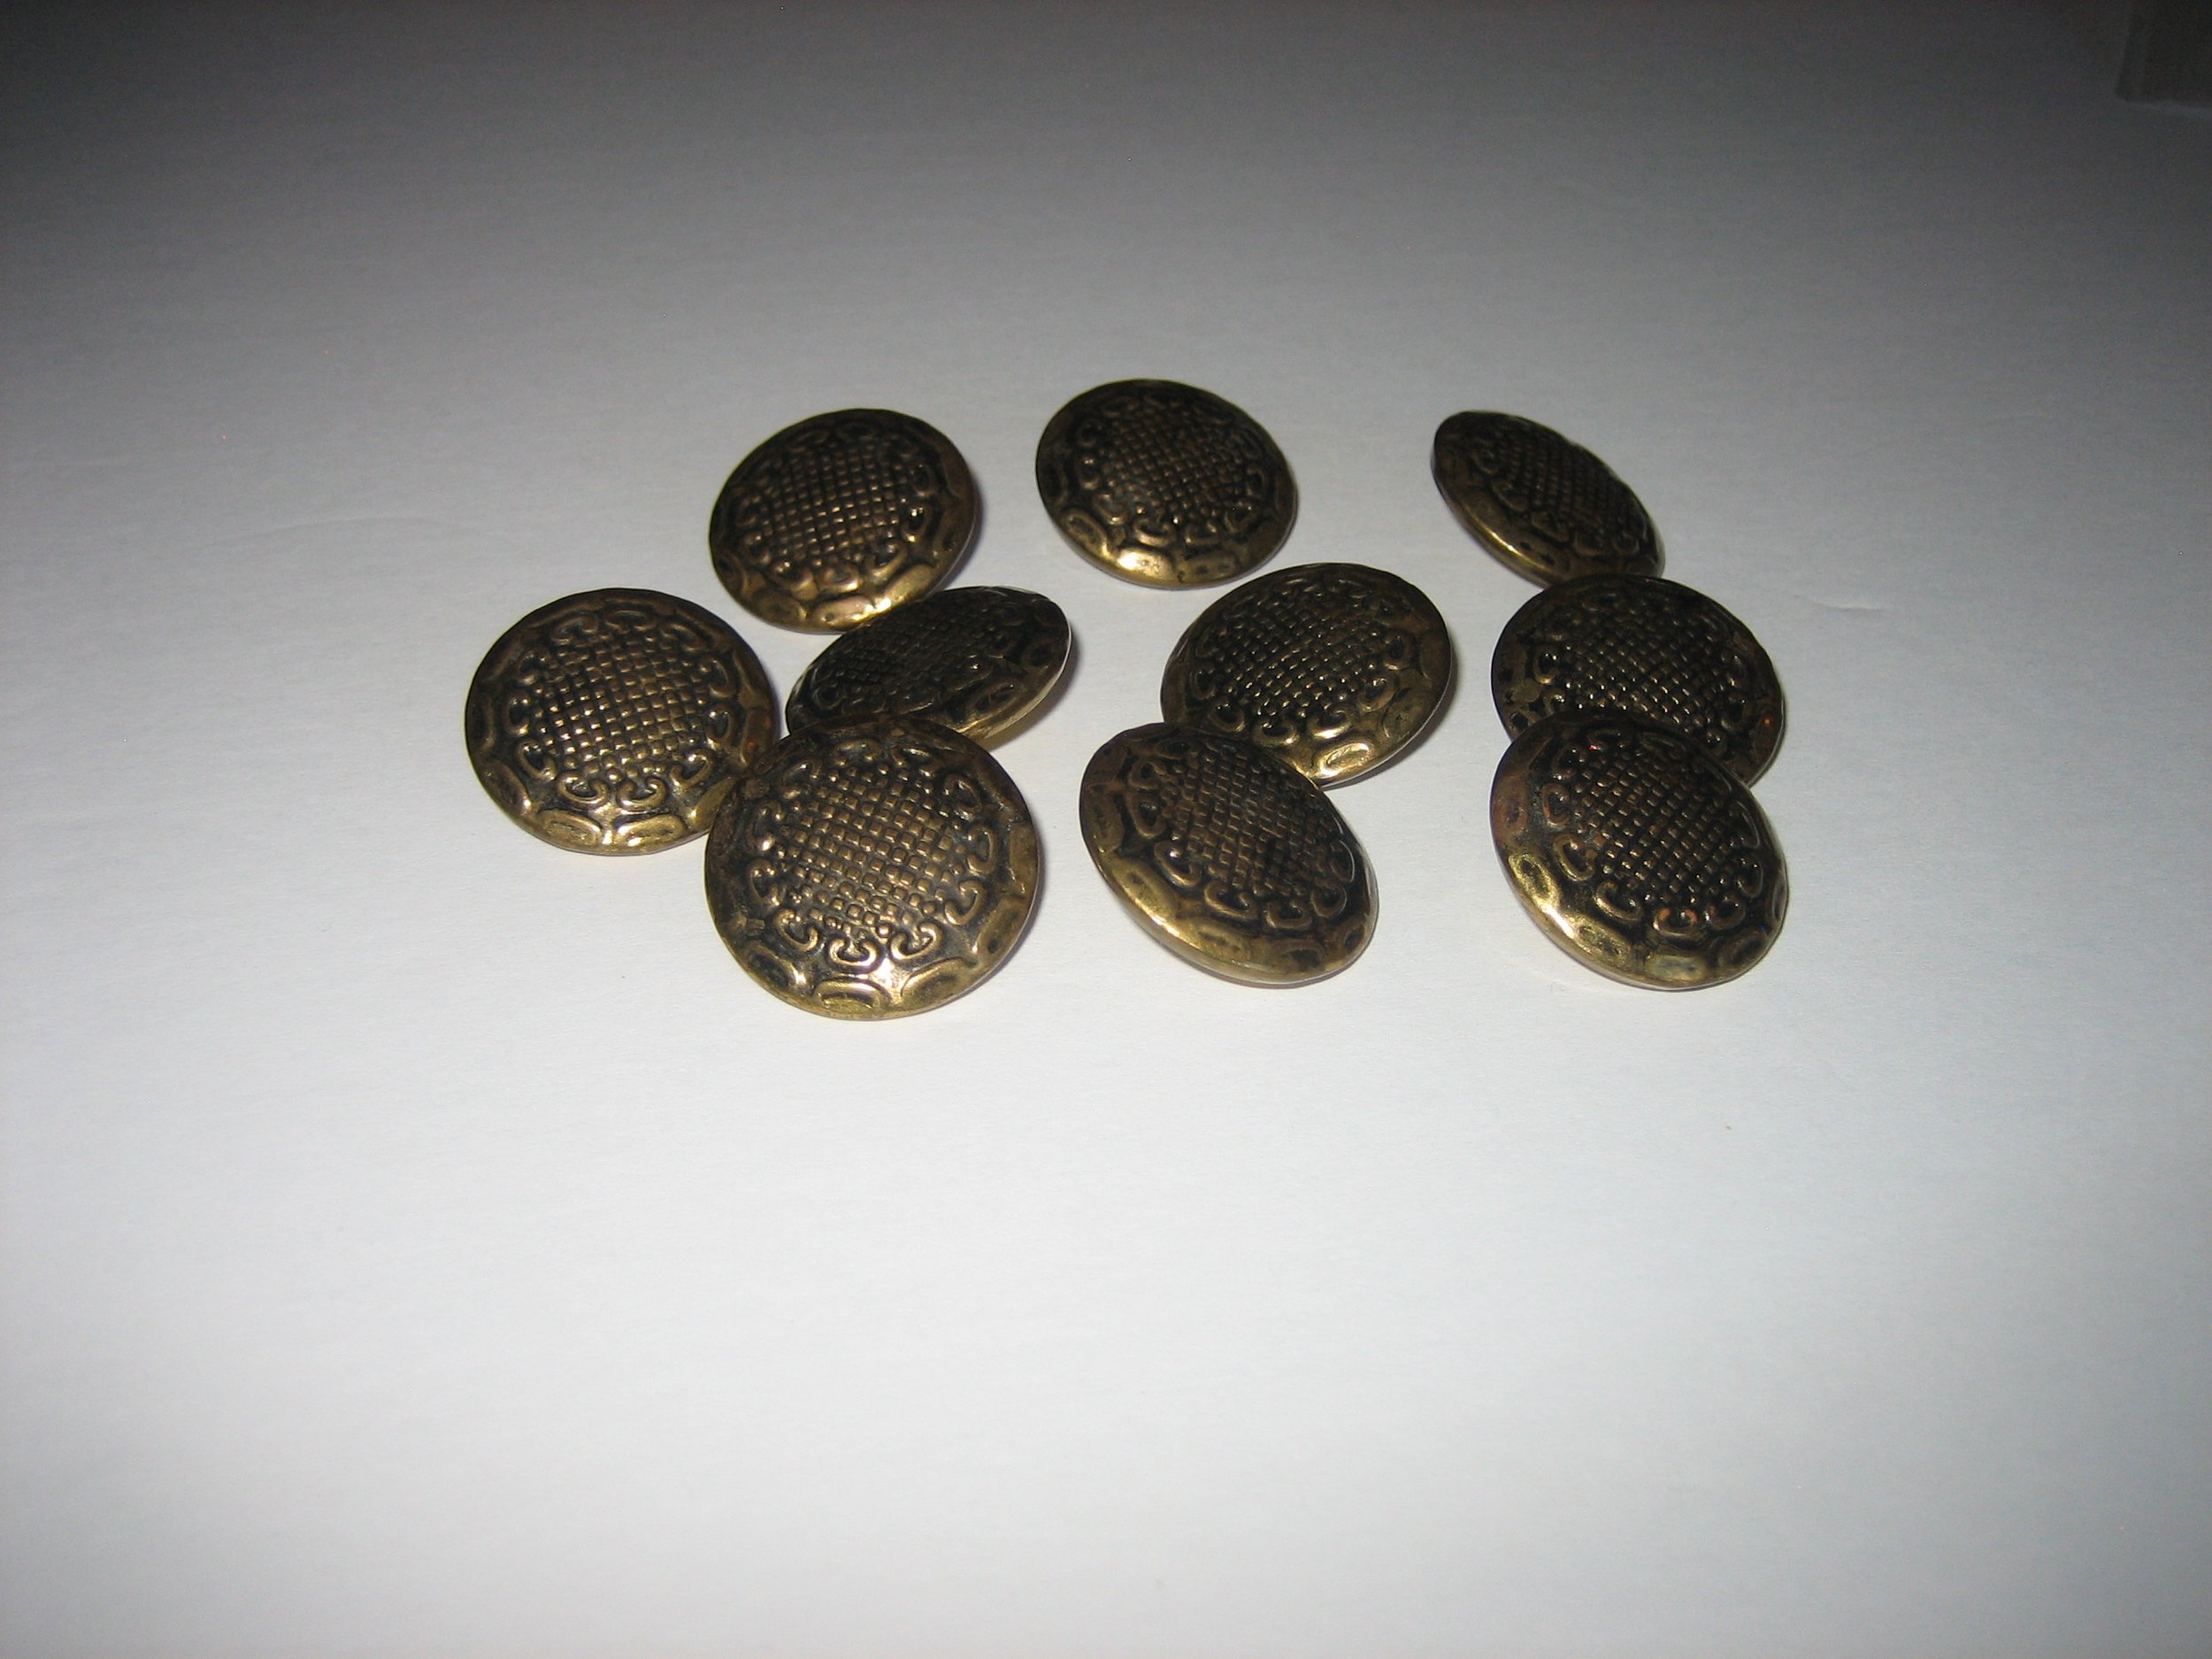 What's in My Button Box-Metal Buttons — 183 Vintage Buttons